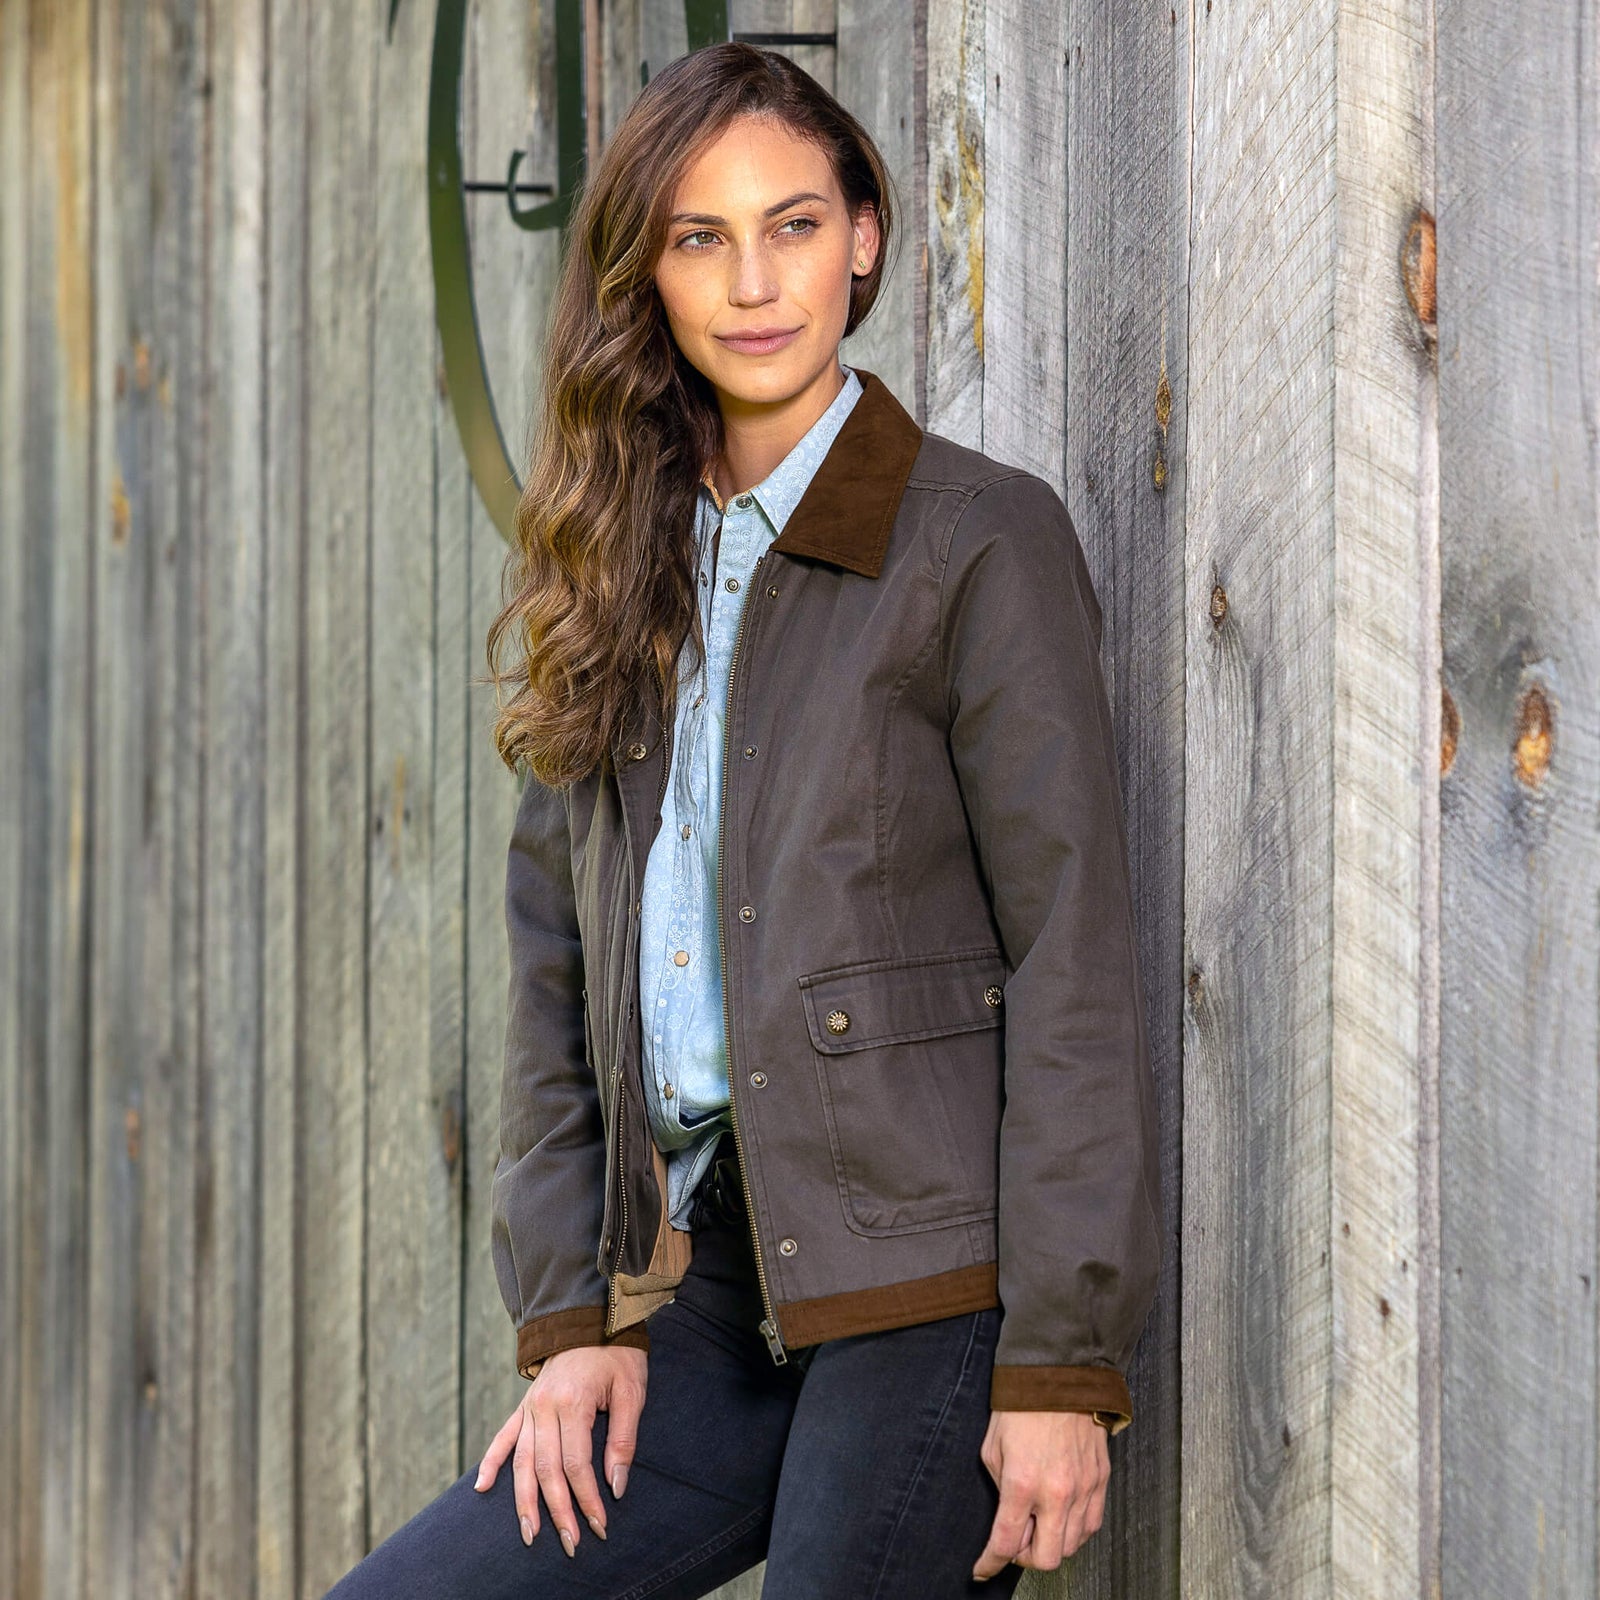 https://cdn.shopify.com/s/files/1/0109/9196/0123/files/kimber-twill-concealed-carry-jacket-brown-front-on-model_1600x.jpg?v=1704679083